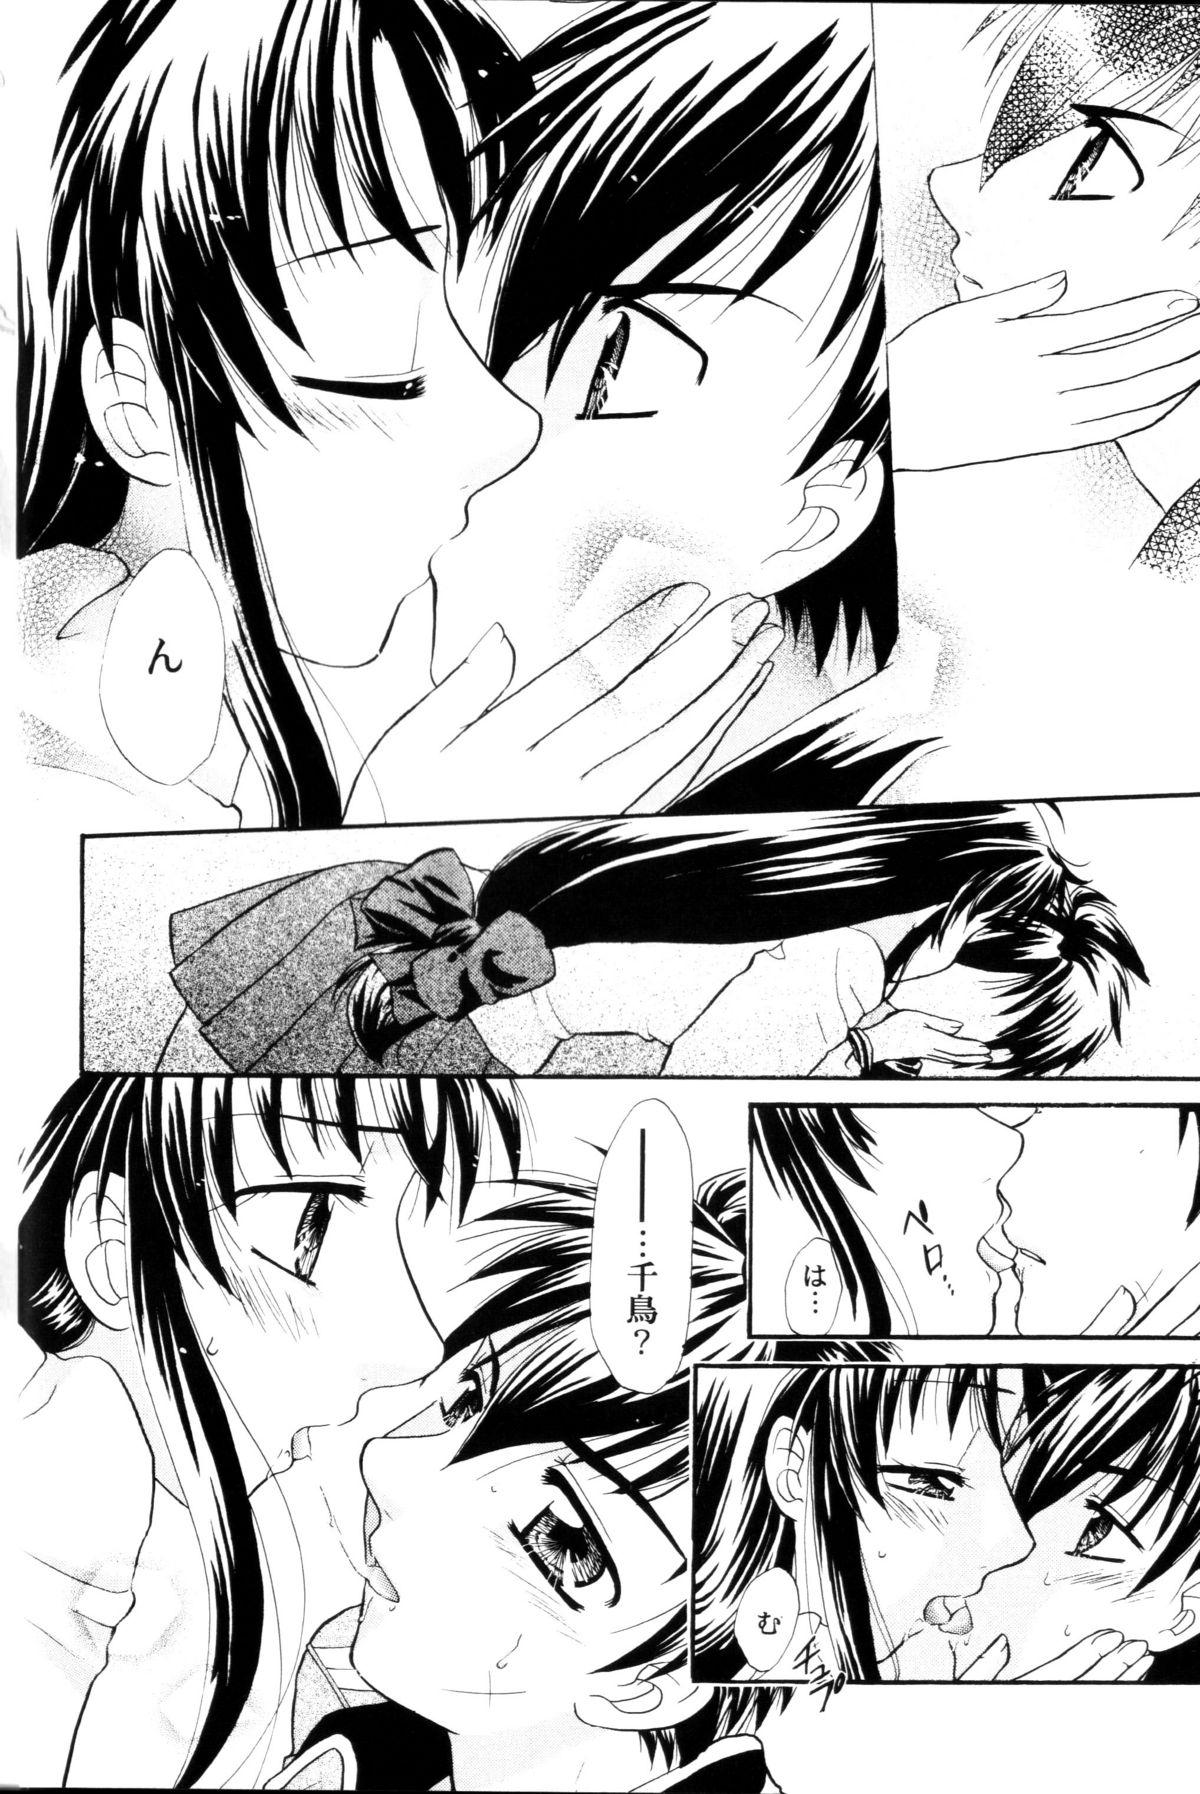 Clit A.I. - Full metal panic Bitch - Page 9